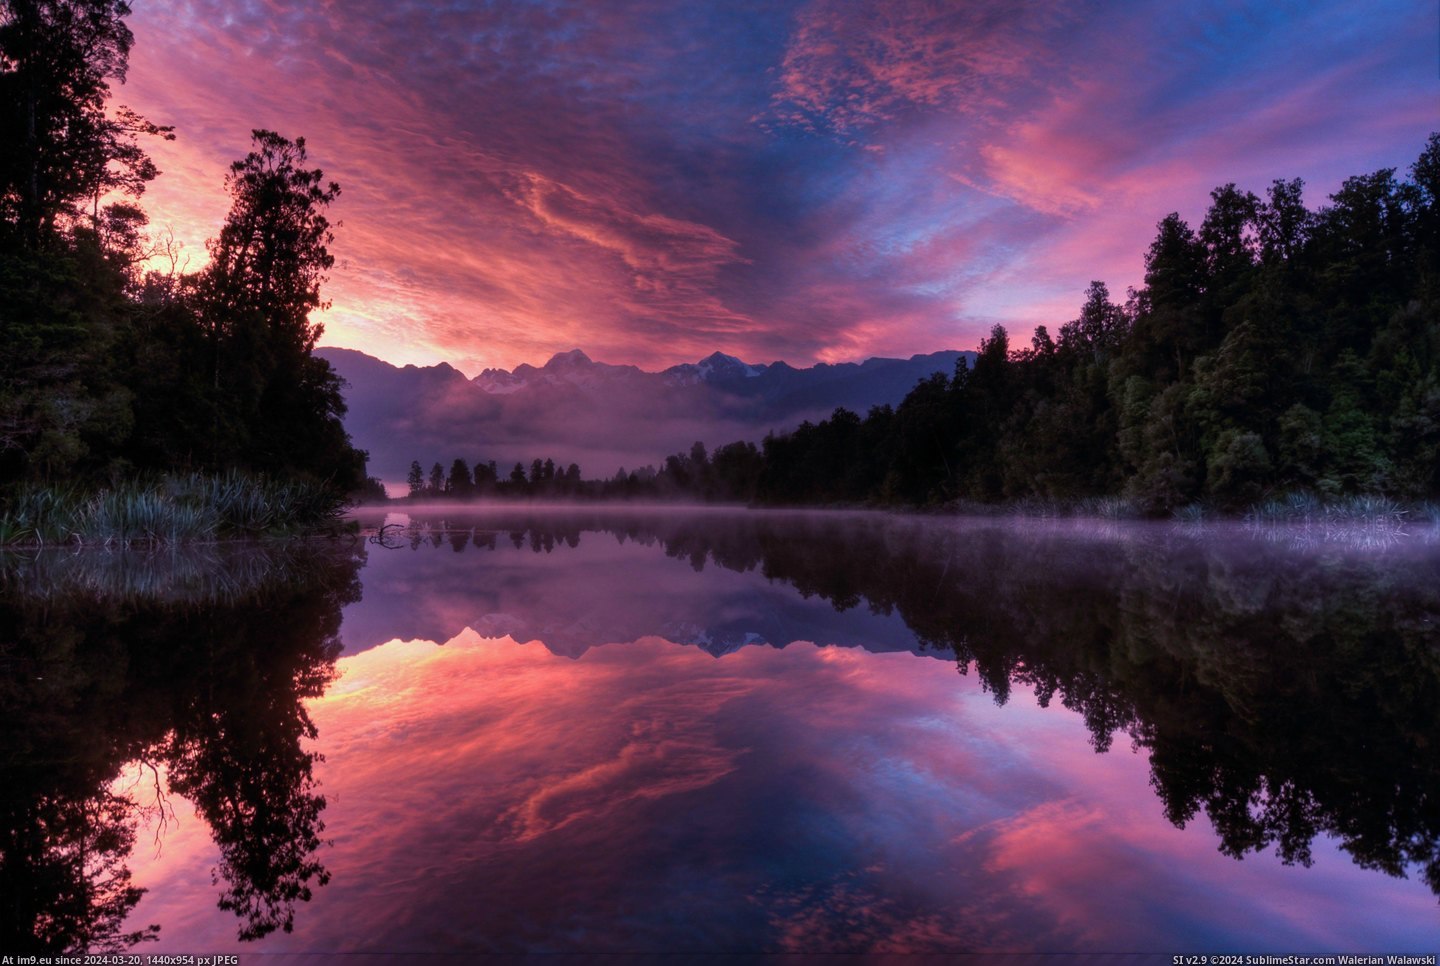 #One #Photos #Lake #Glacier #Mentioned #Fox #Zealand #Sunrise [Earthporn] Someone mentioned we need more New Zealand photos, so here's one I took at Lake Matheson near Fox Glacier at sunrise Pic. (Obraz z album My r/EARTHPORN favs))